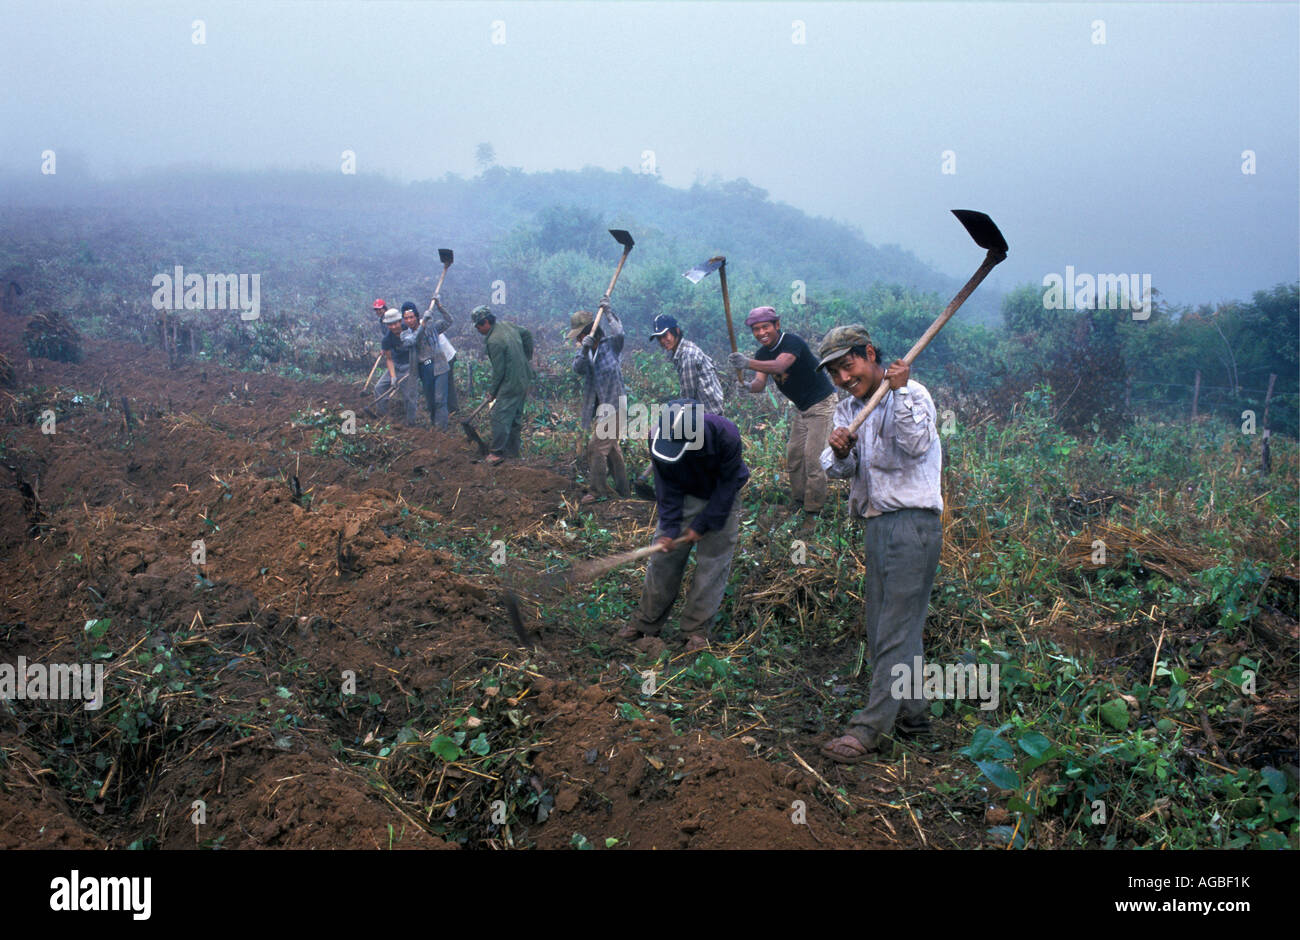 Laos, Luang Namtha, Chinese immigrant workers preparing land of owners Stock Photo